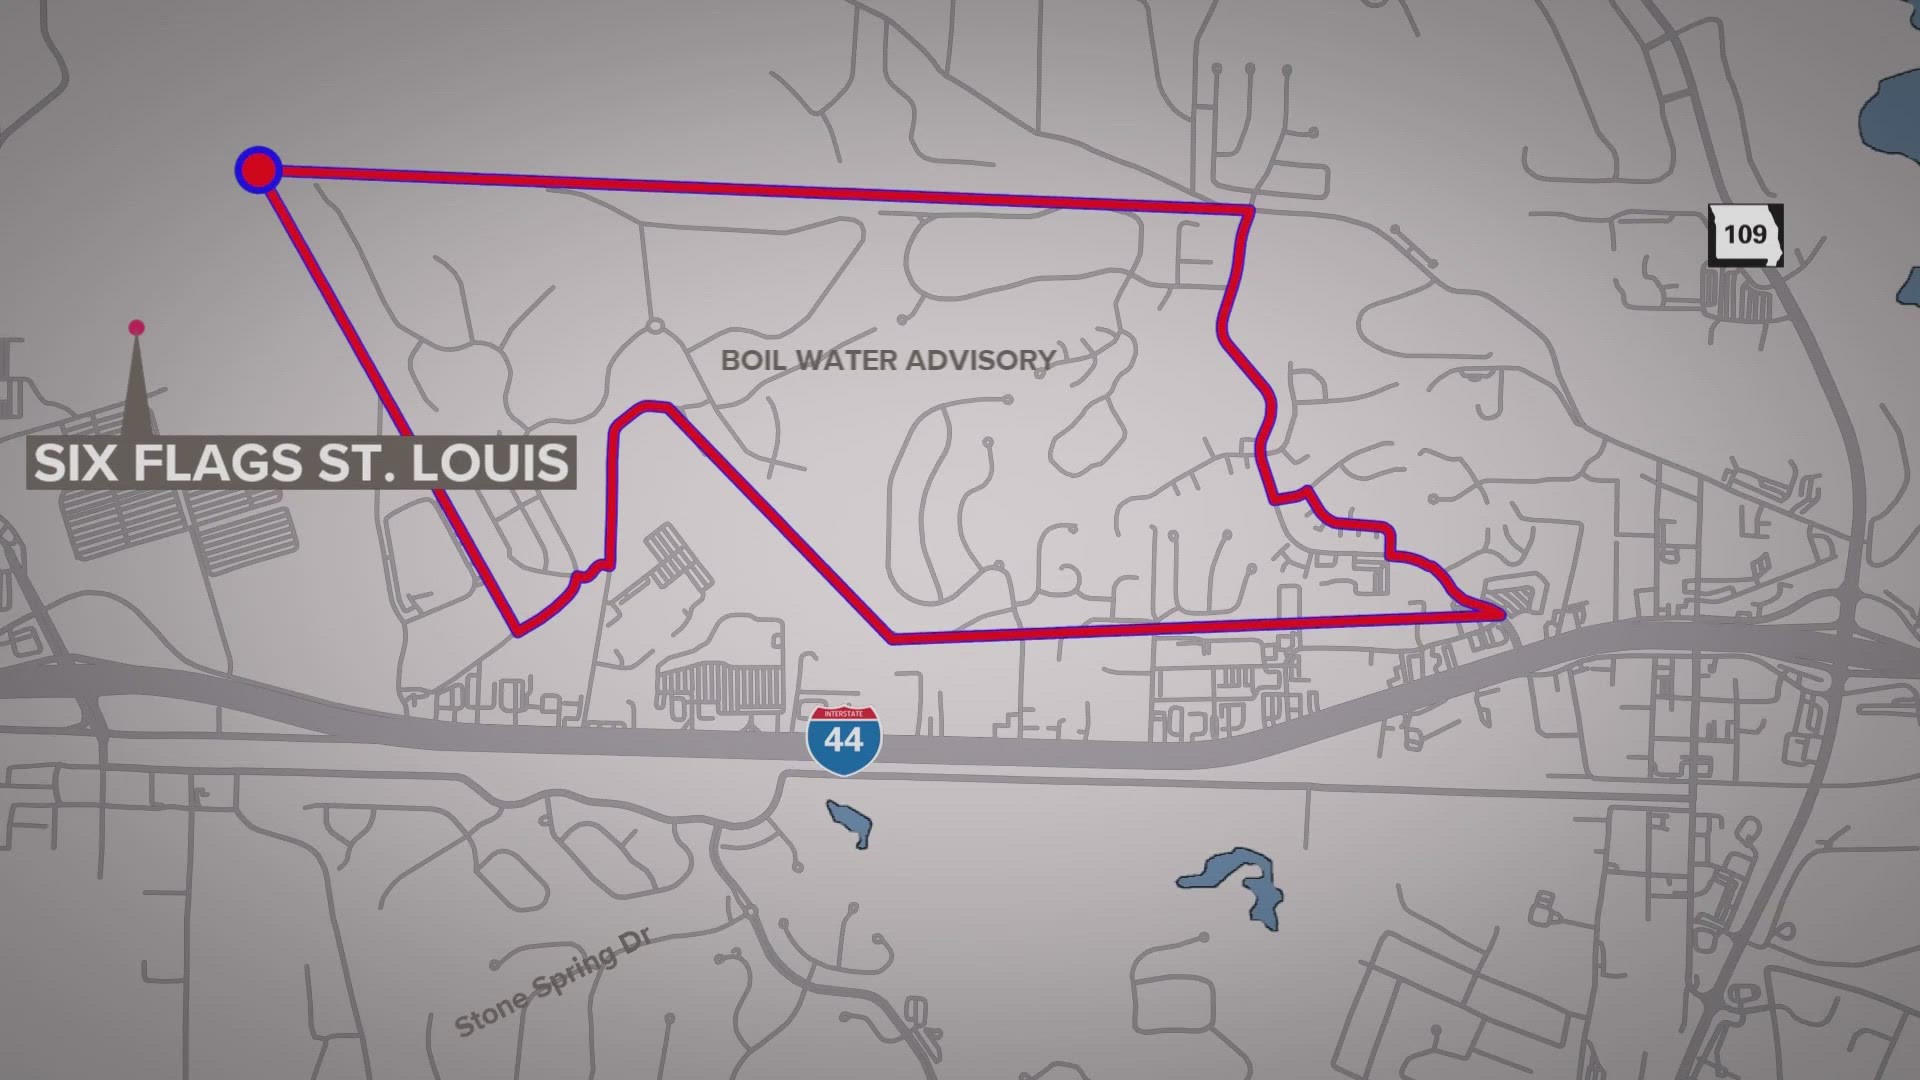 A boil water advisory has been issued for Eureka, Missouri, from Thursday night until Saturday night. It comes after a loss of pressure in the water system.